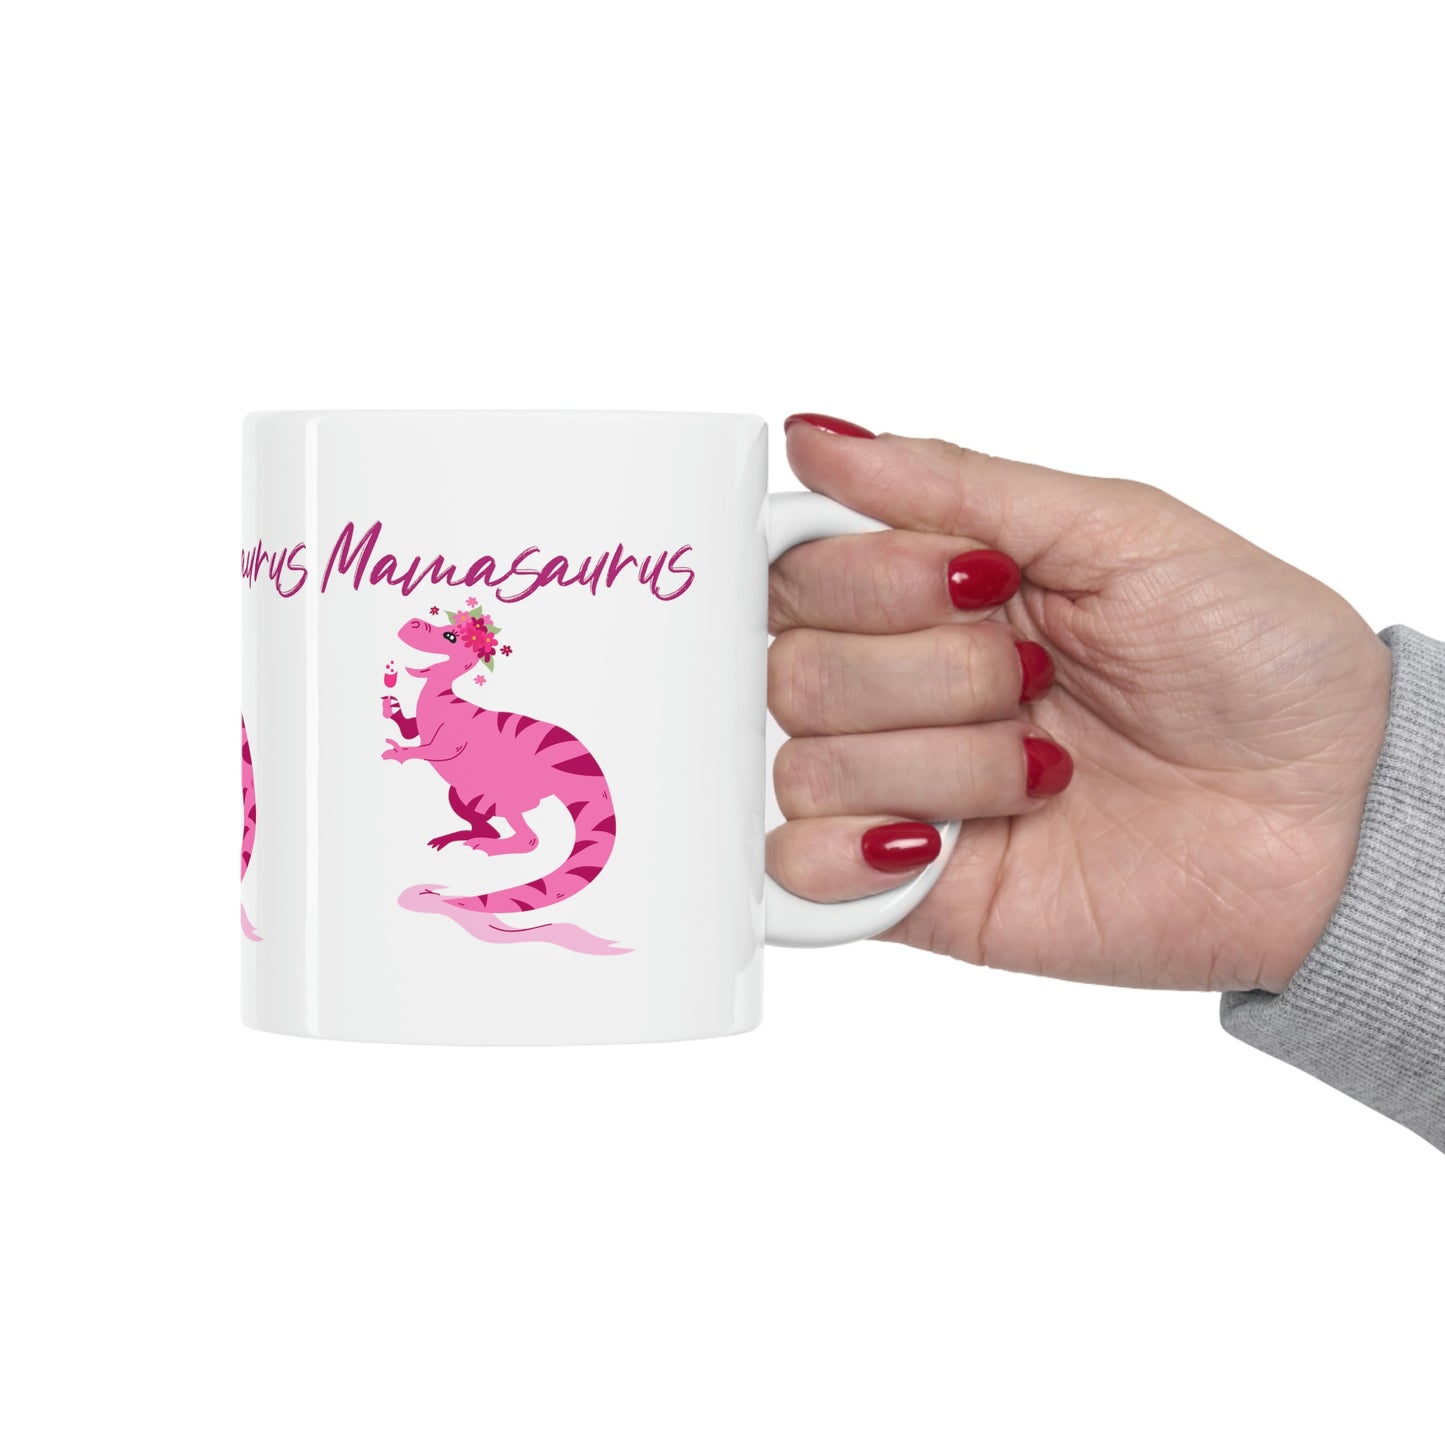 Mock up of our mug being held by someone with red fingernail polish